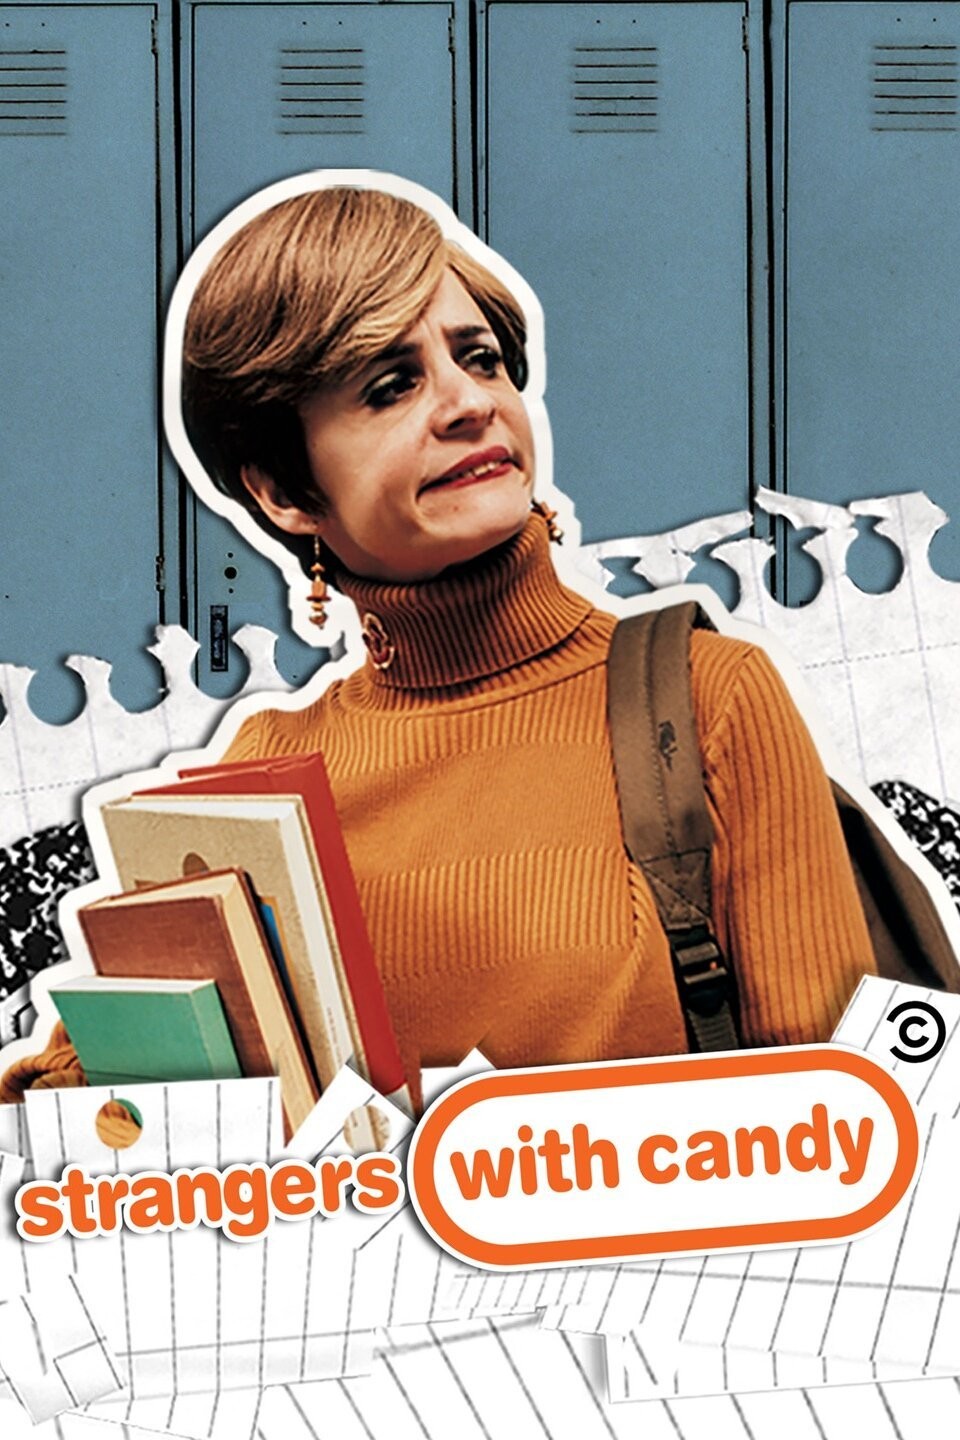 Ten Years Ago: Strangers With Candy – 10 Years Ago: Films in Retrospective